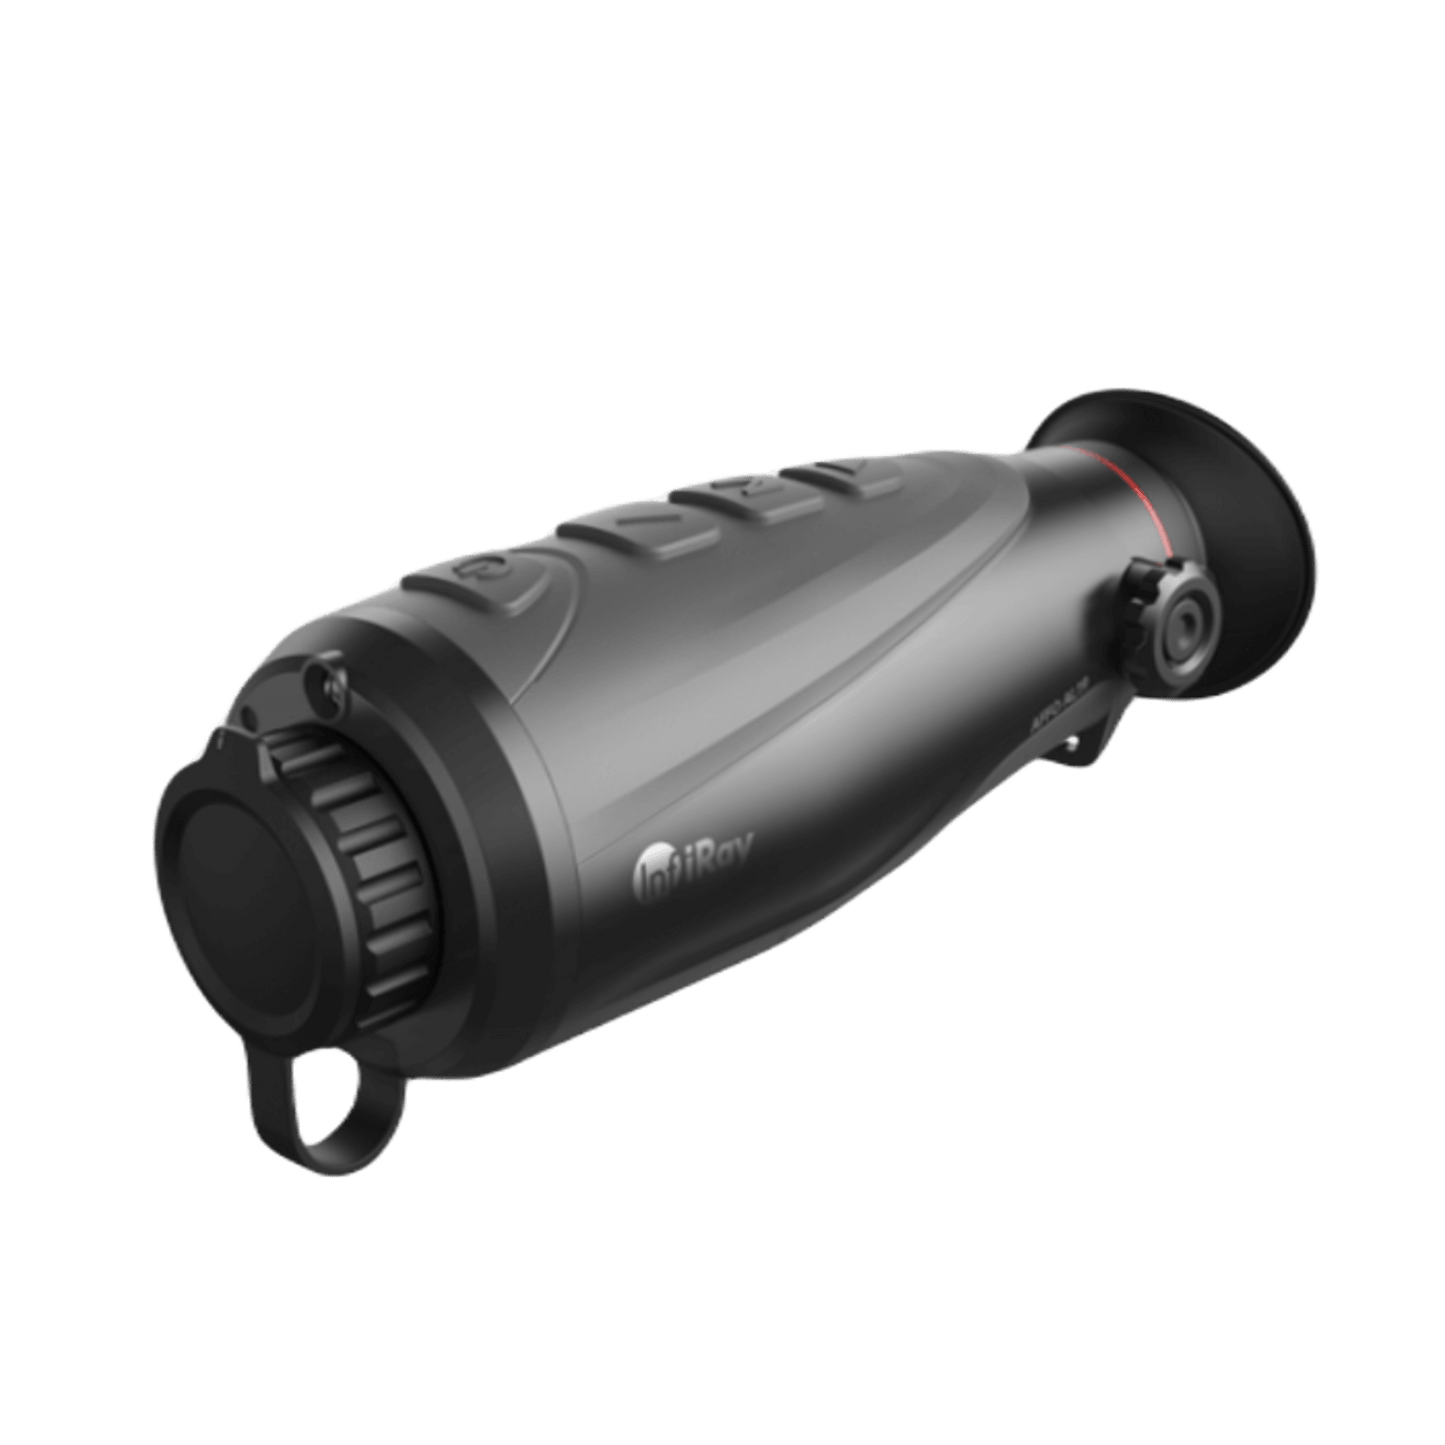 InfiRay AFFO AL19 Thermal Imaging Monocular for Sale Cape Thermal Front Left View